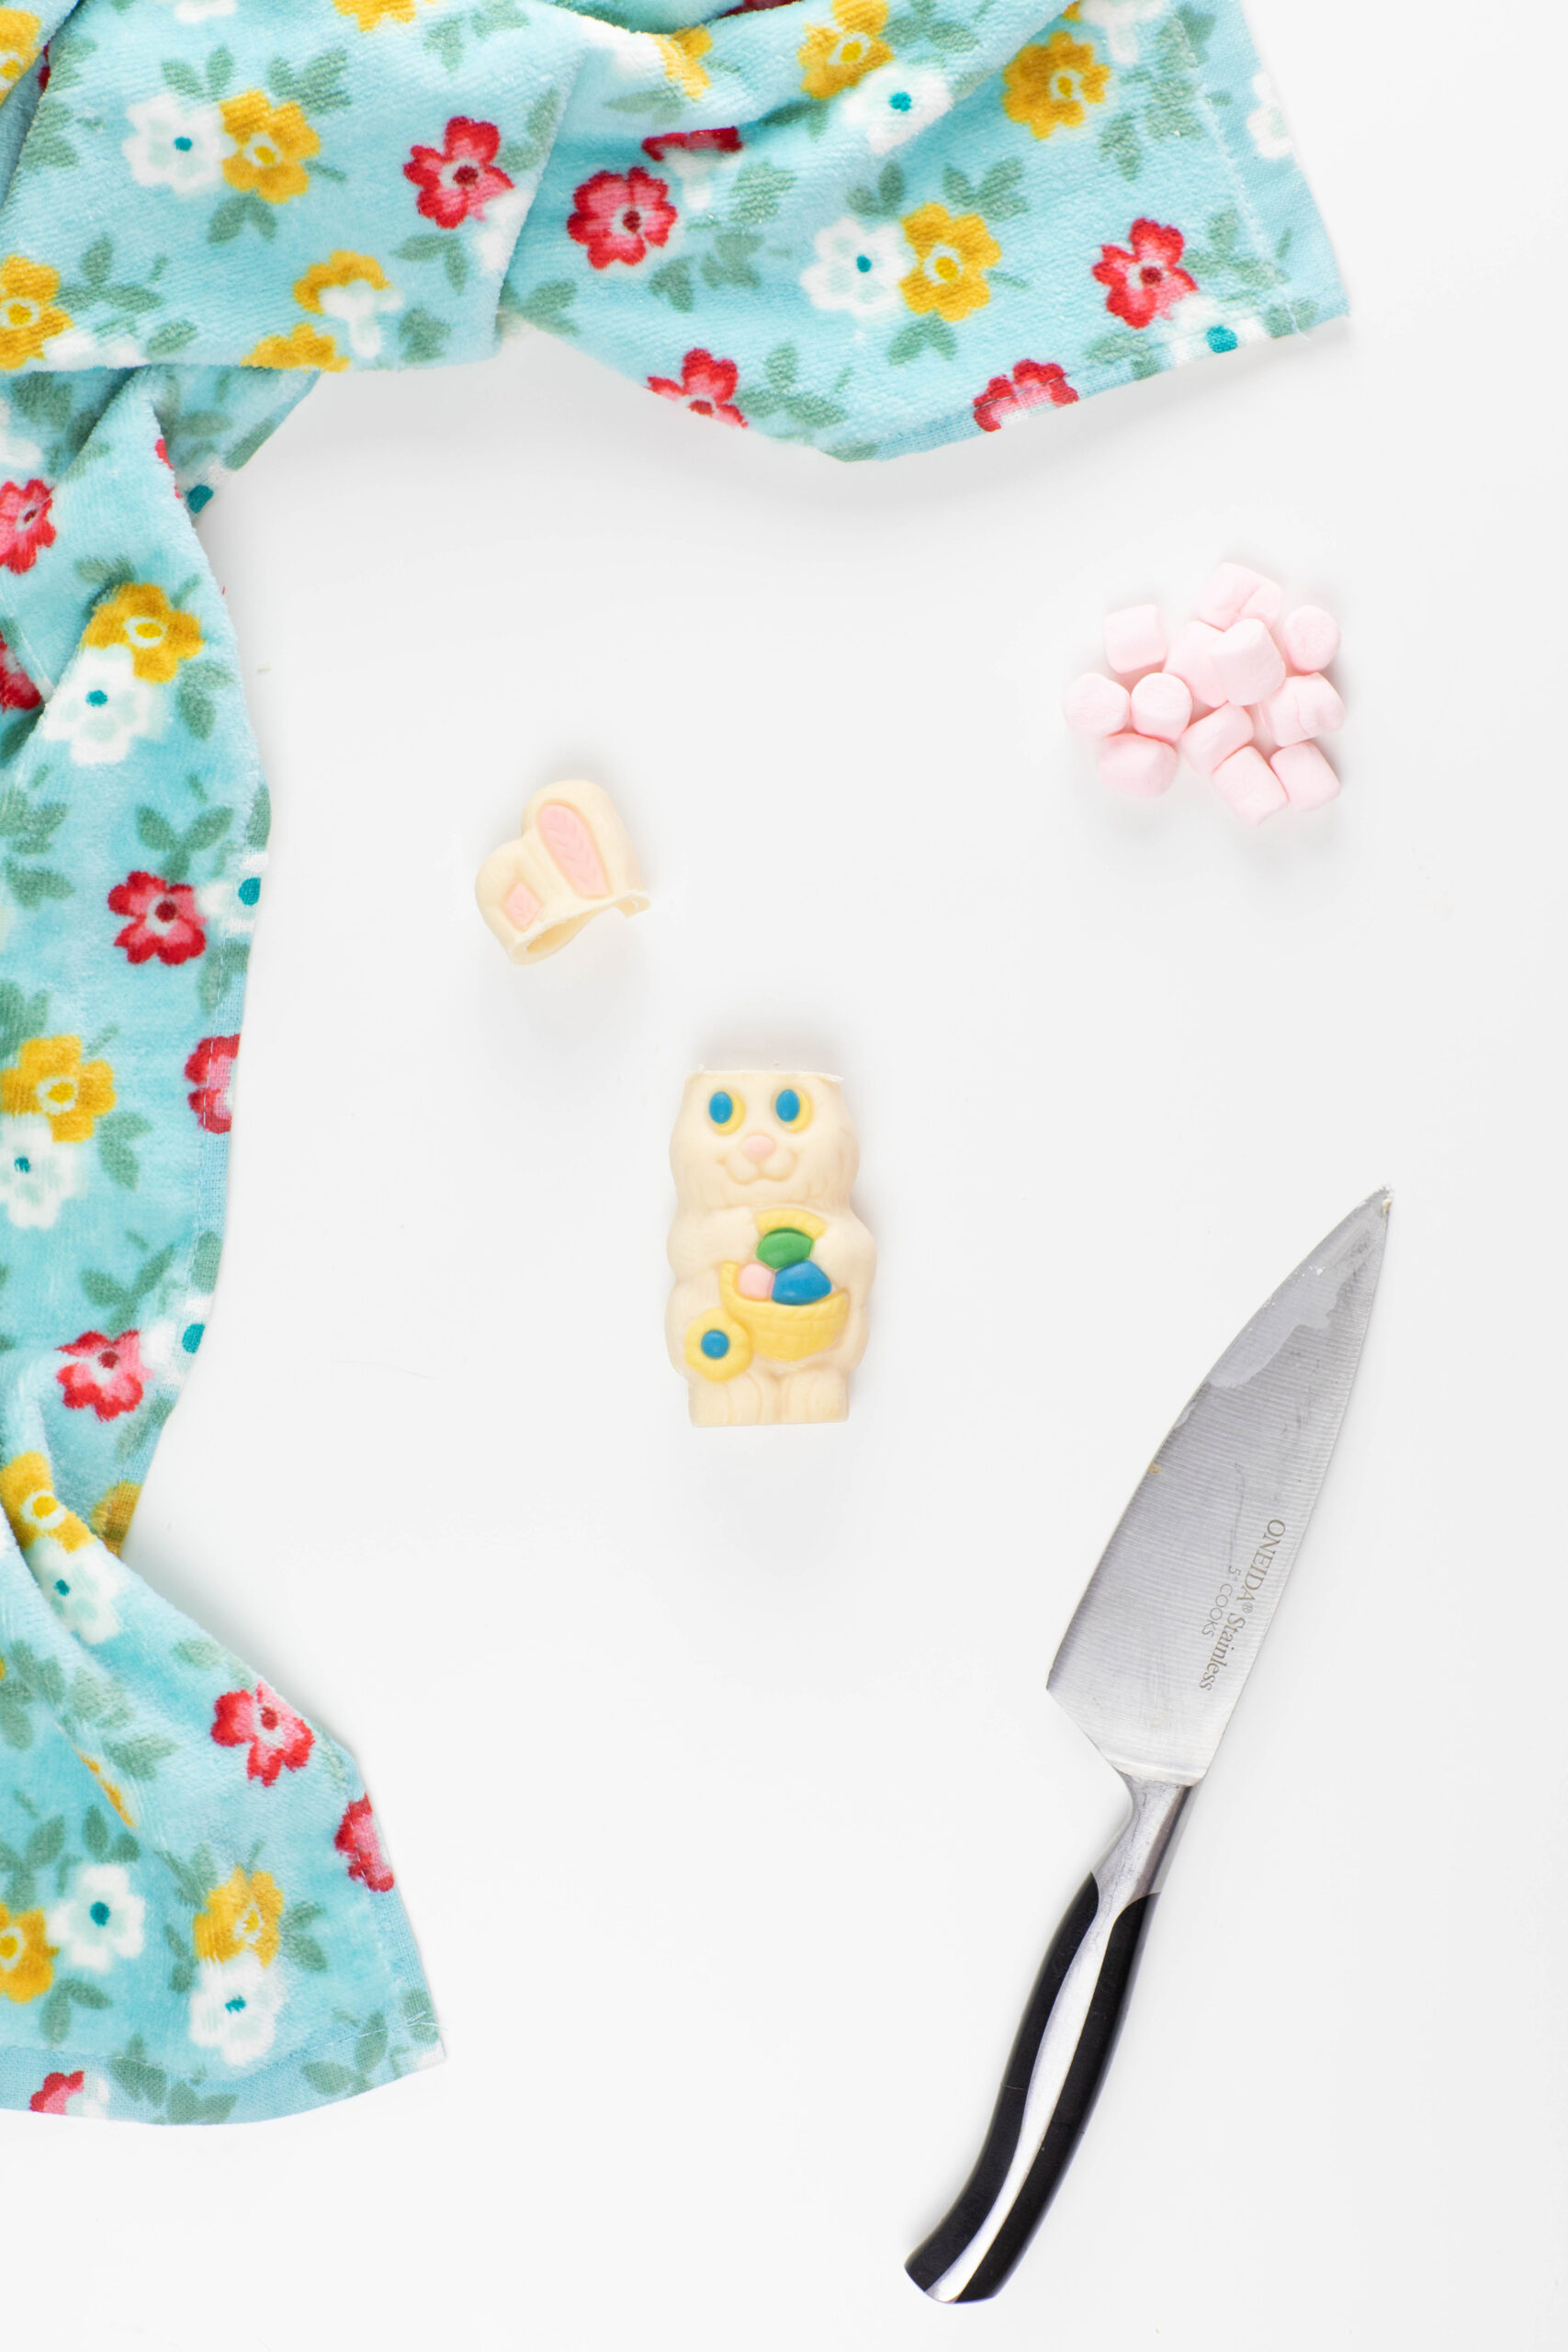 hollow white chocolate bunny with ears melted off with heated knife